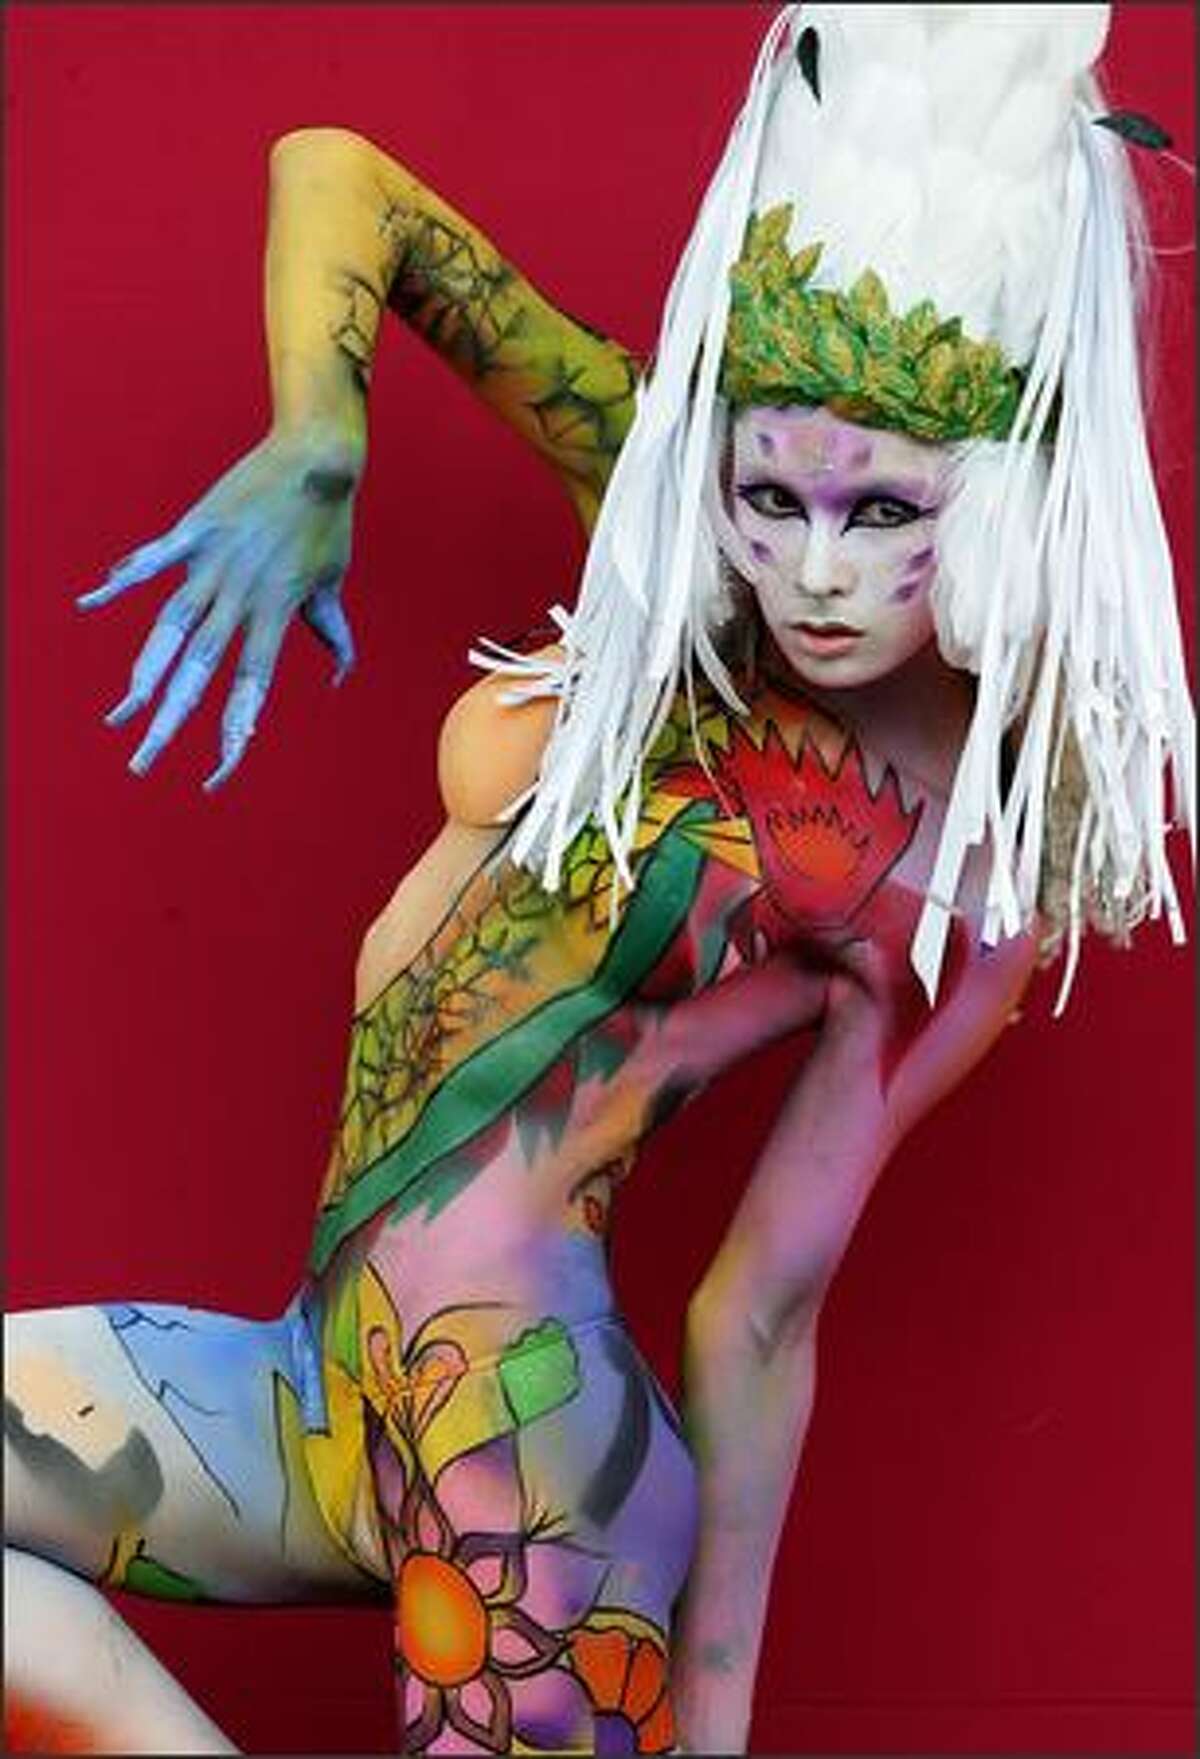 DAEGU, SOUTH KOREA - AUGUST 29: A model participates in the 2008 World Body Painting Festival Asia at World Cup Stadium on August 29, 2008 in Daegu, South Korea. The festival is the largest in the field of body painting and introduces the art form to thousands of visitors each year.